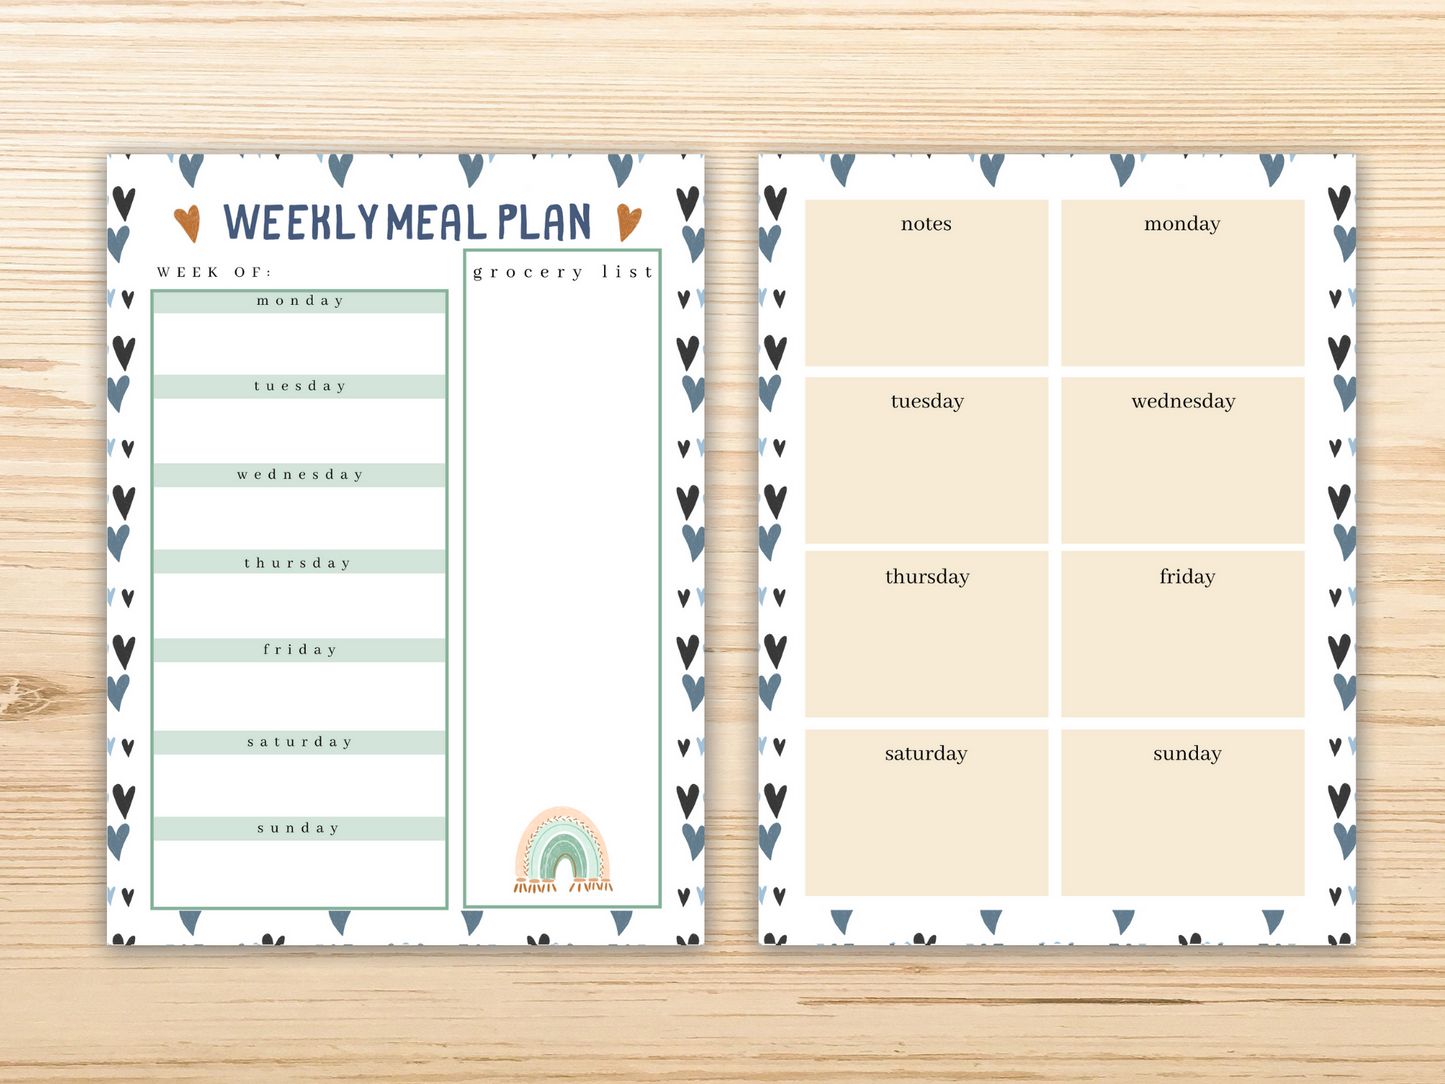 Printable Neutral Boho Rainbow Planner Inserts for Happy Planner